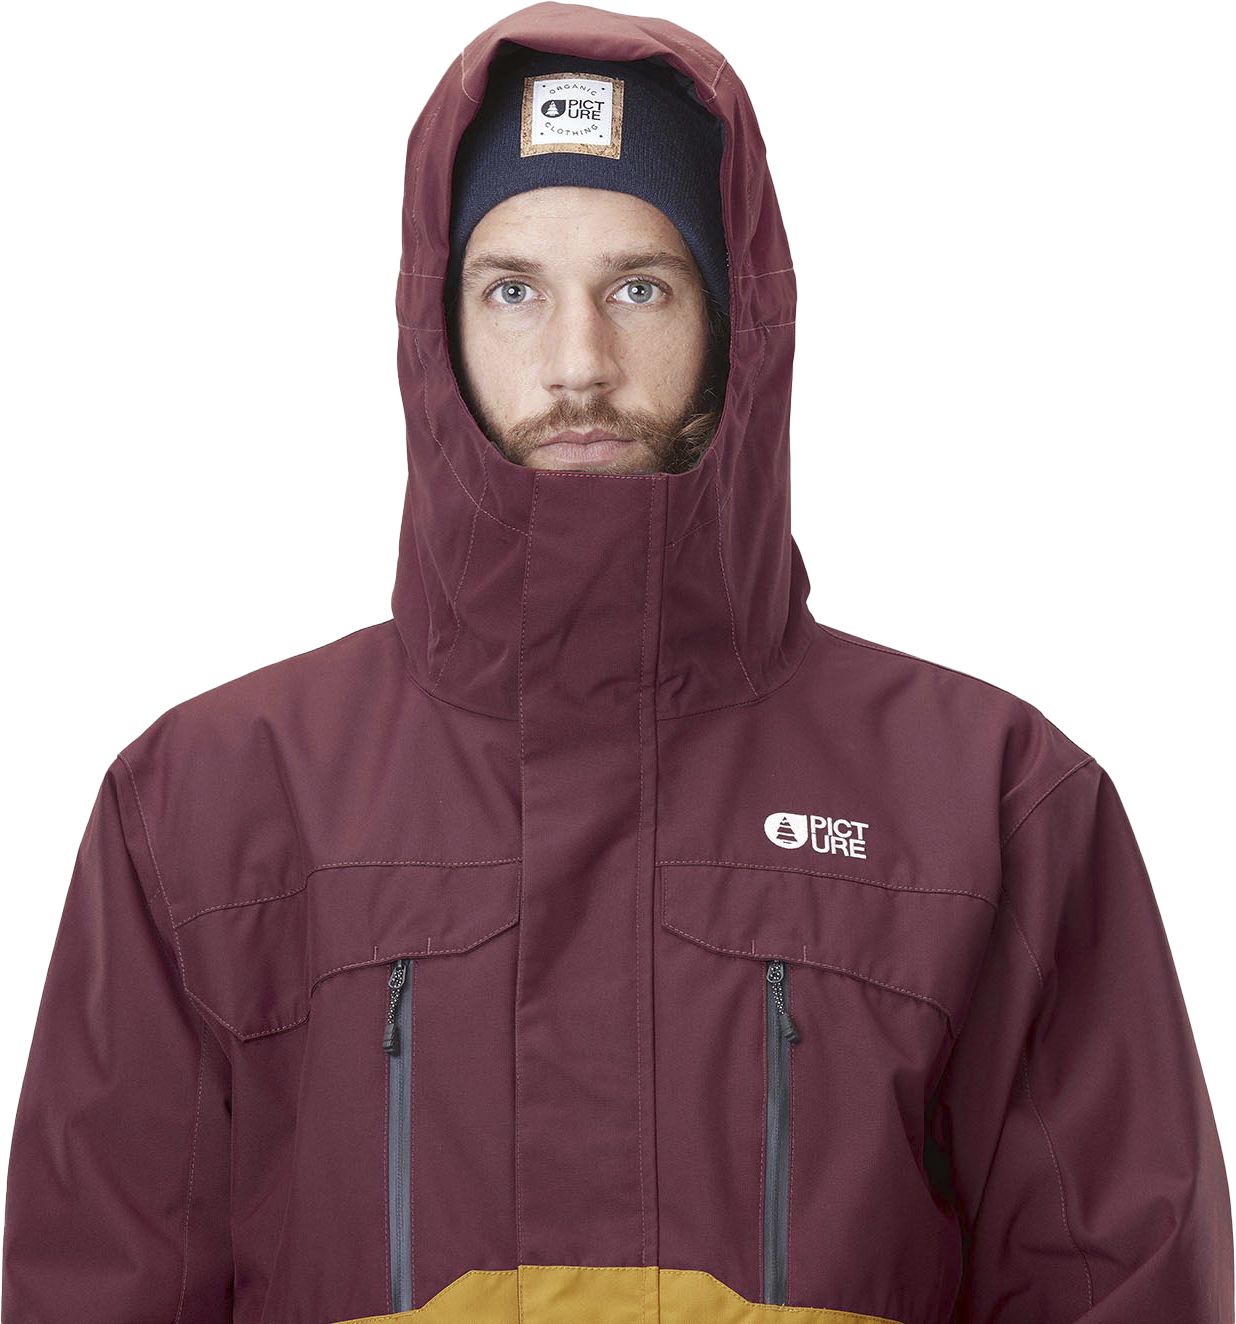 PICTURE, M PURE JACKET